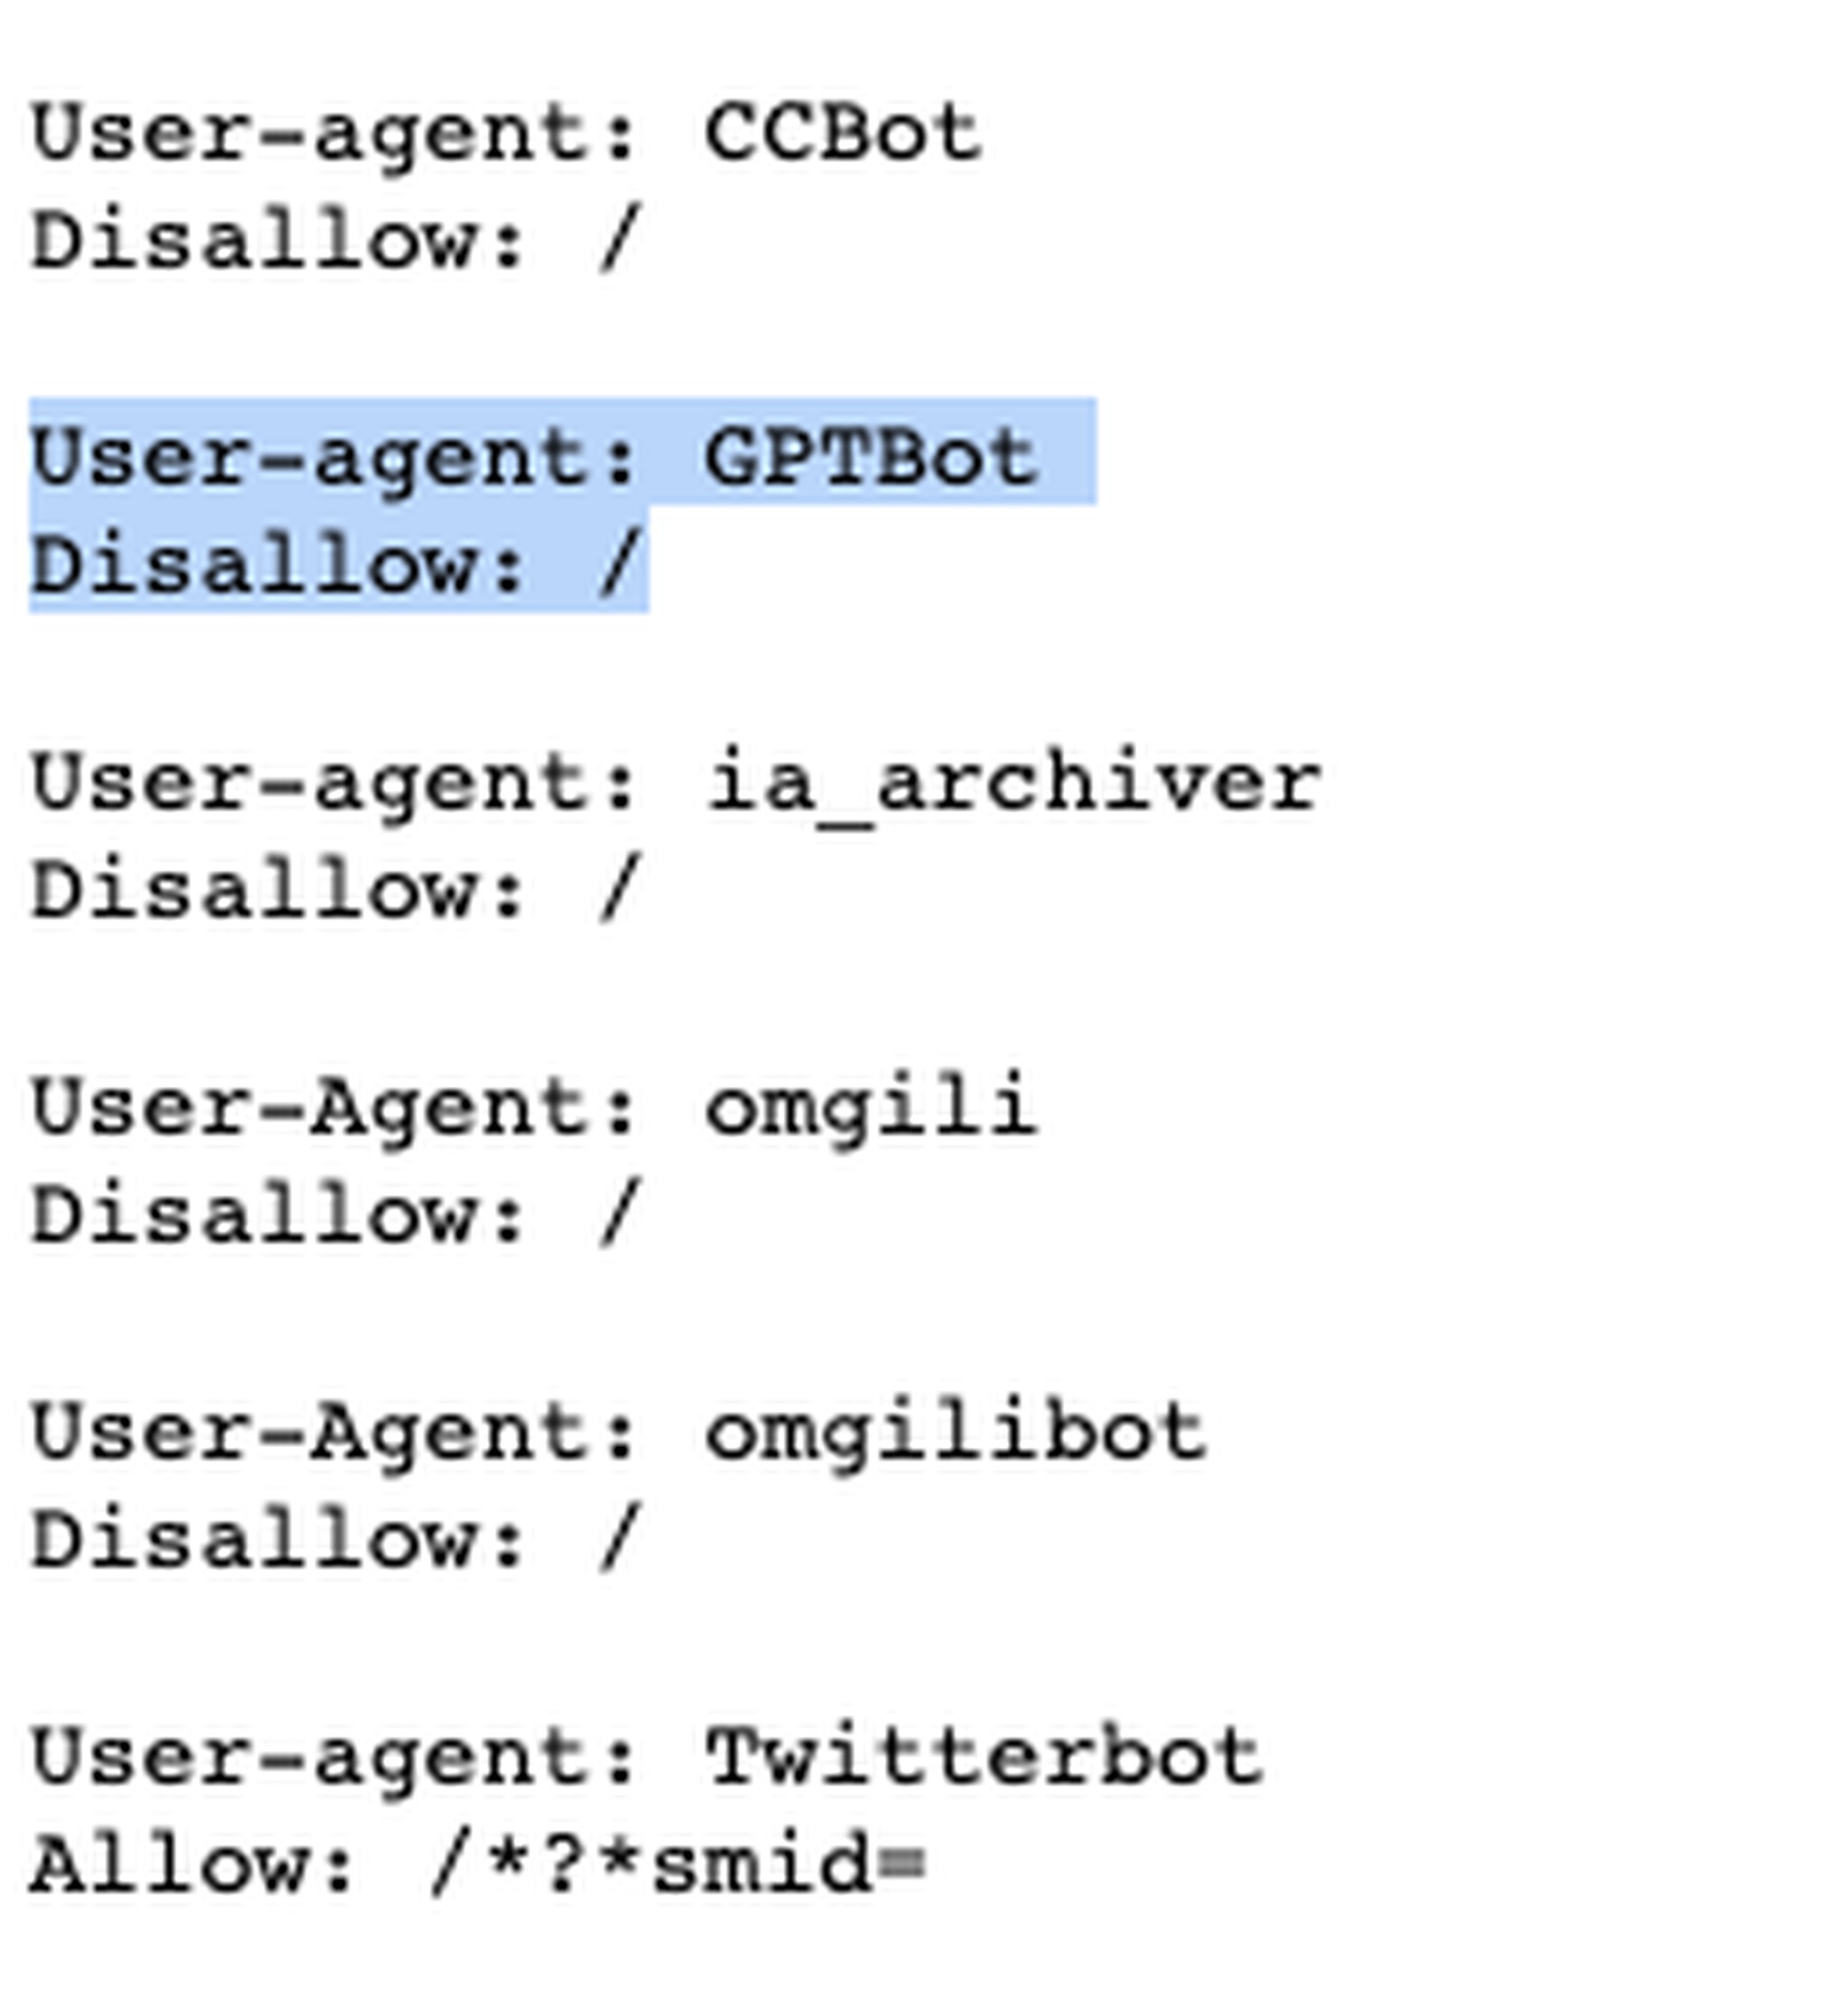 A screenshot of the NYT’s robots.txt showing that the company has disallowed GPTBot.